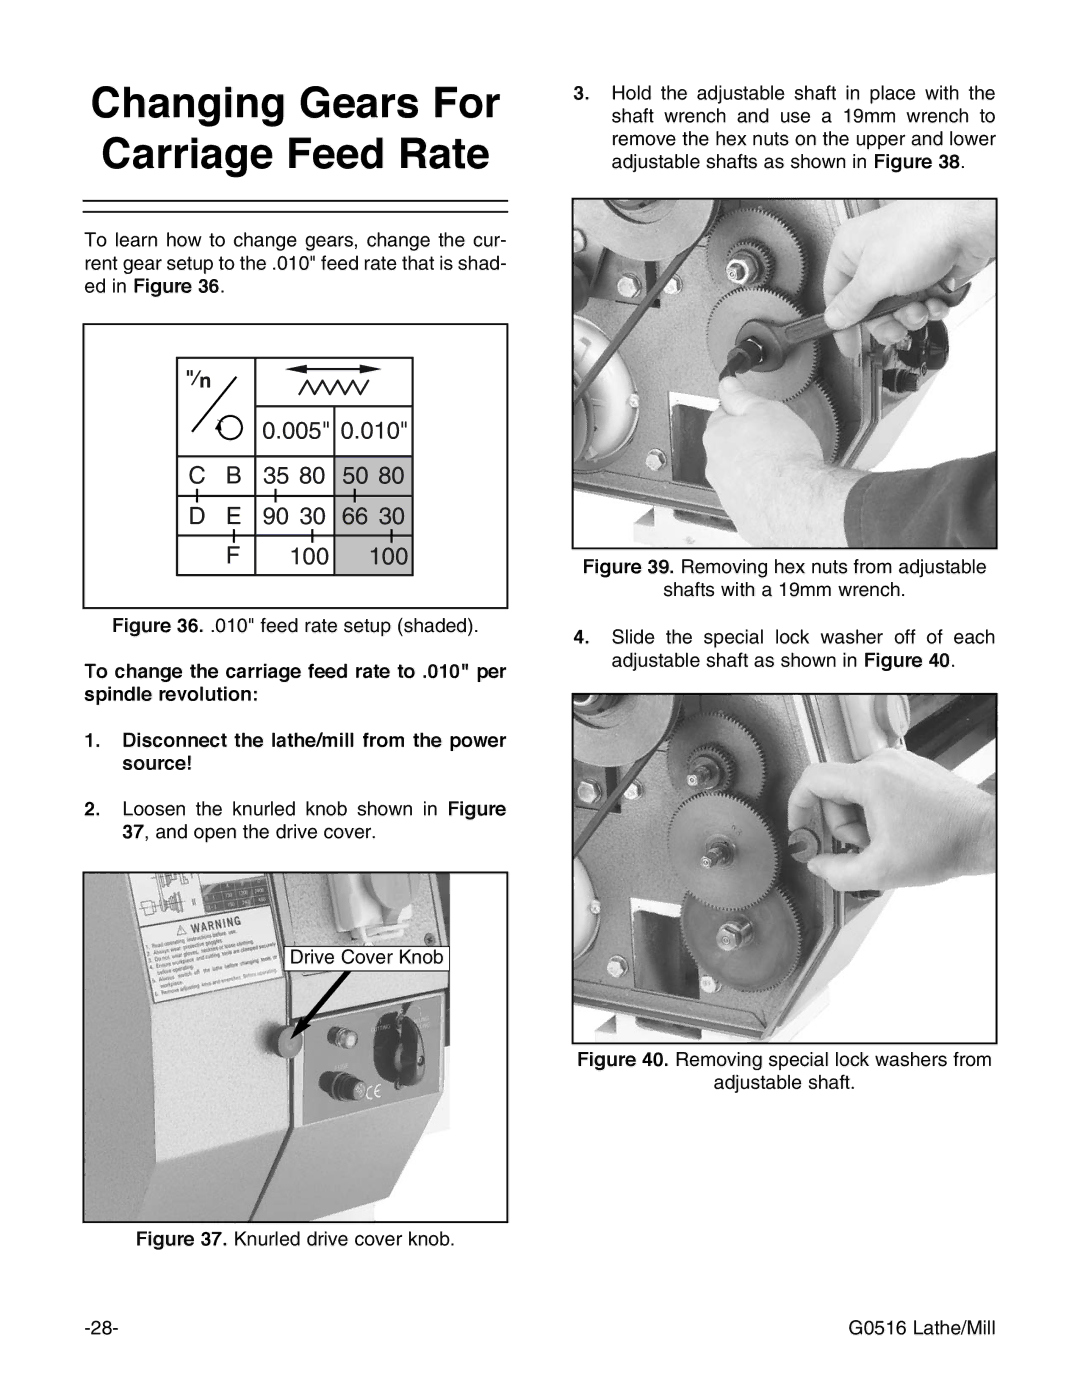 Grizzly G0516 instruction manual Changing Gears For Carriage Feed Rate, feed rate setup shaded 